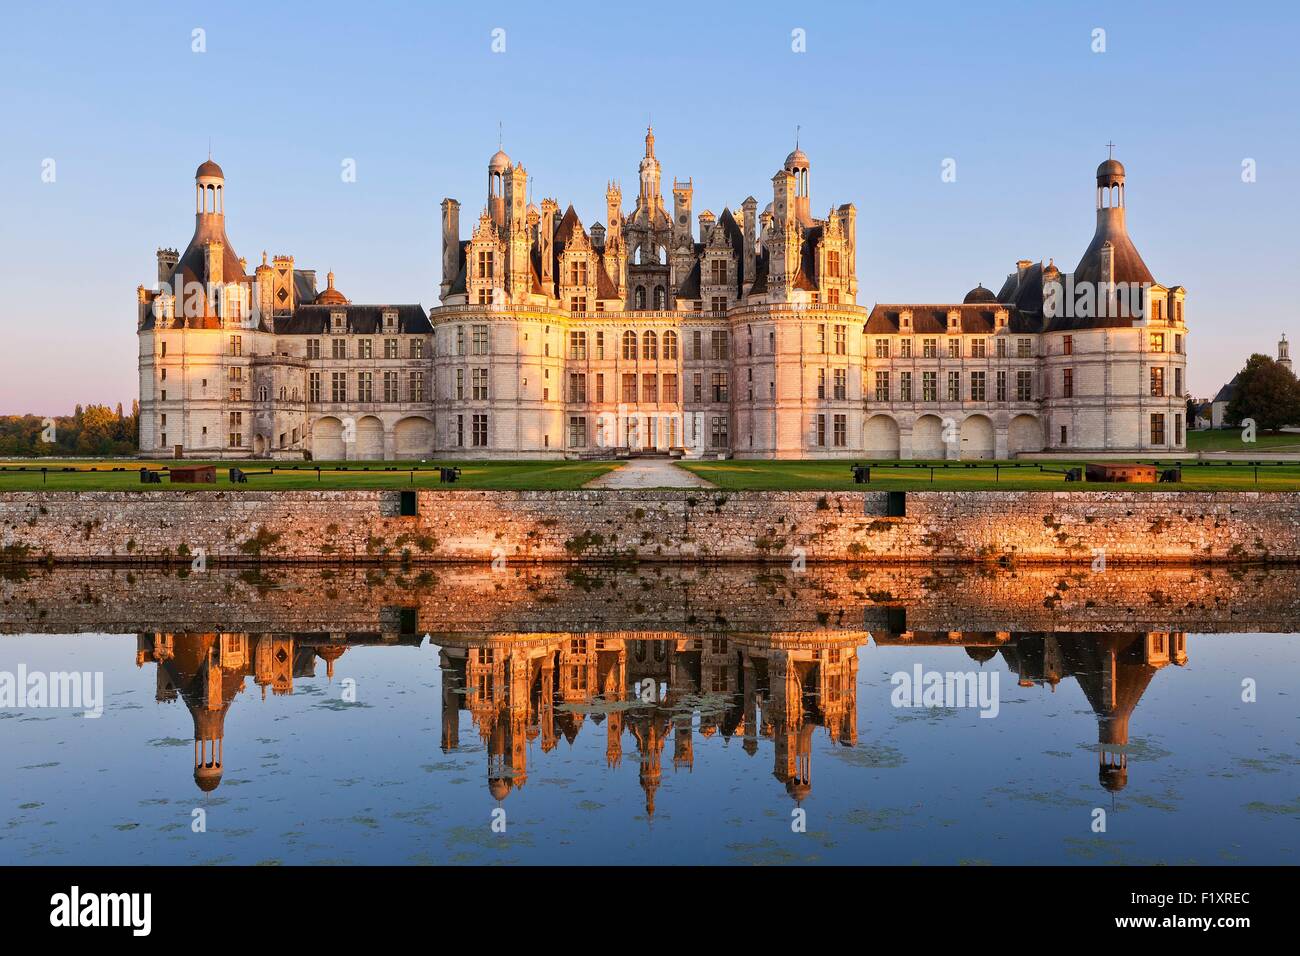 France, Loir et Cher, Loire Valley, Chambord, Chateau de Chambord listed as World Heritage by UNESCO, built in 16th century in Renaissance style, Stock Photo